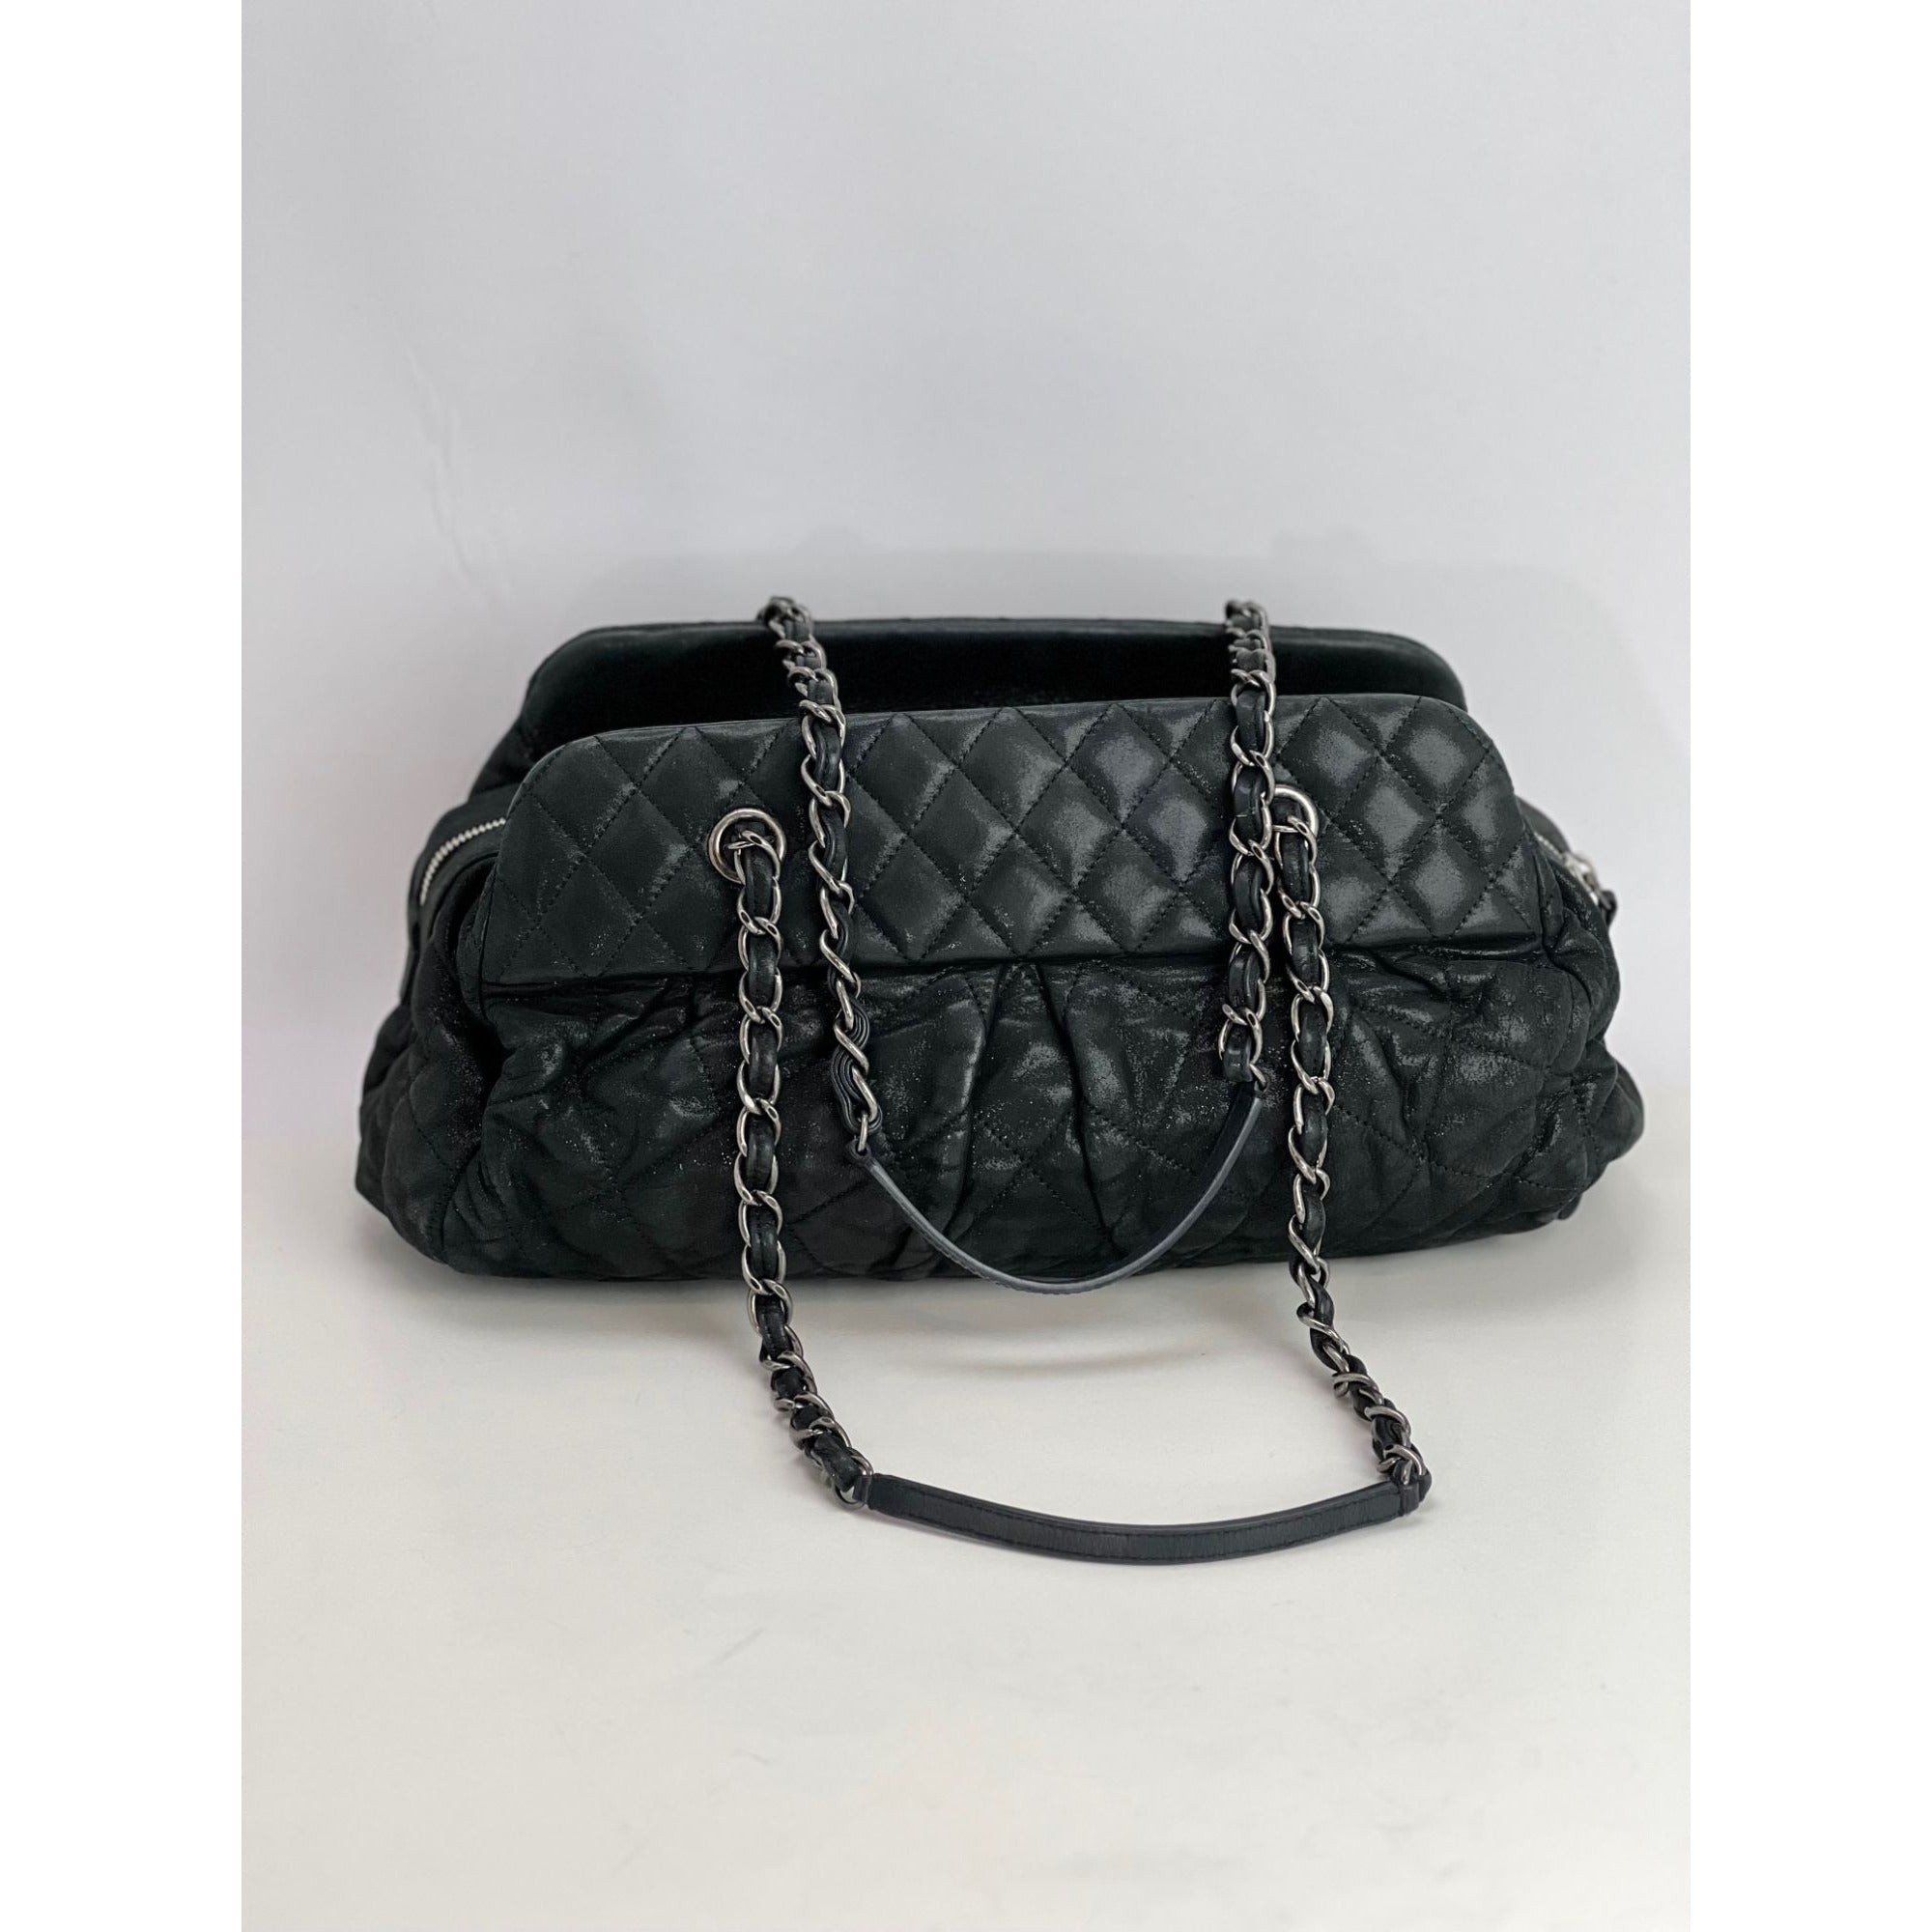 CHANEL Chanel Iridescent Calfskin Quilted CC Tote Black, gmayer1